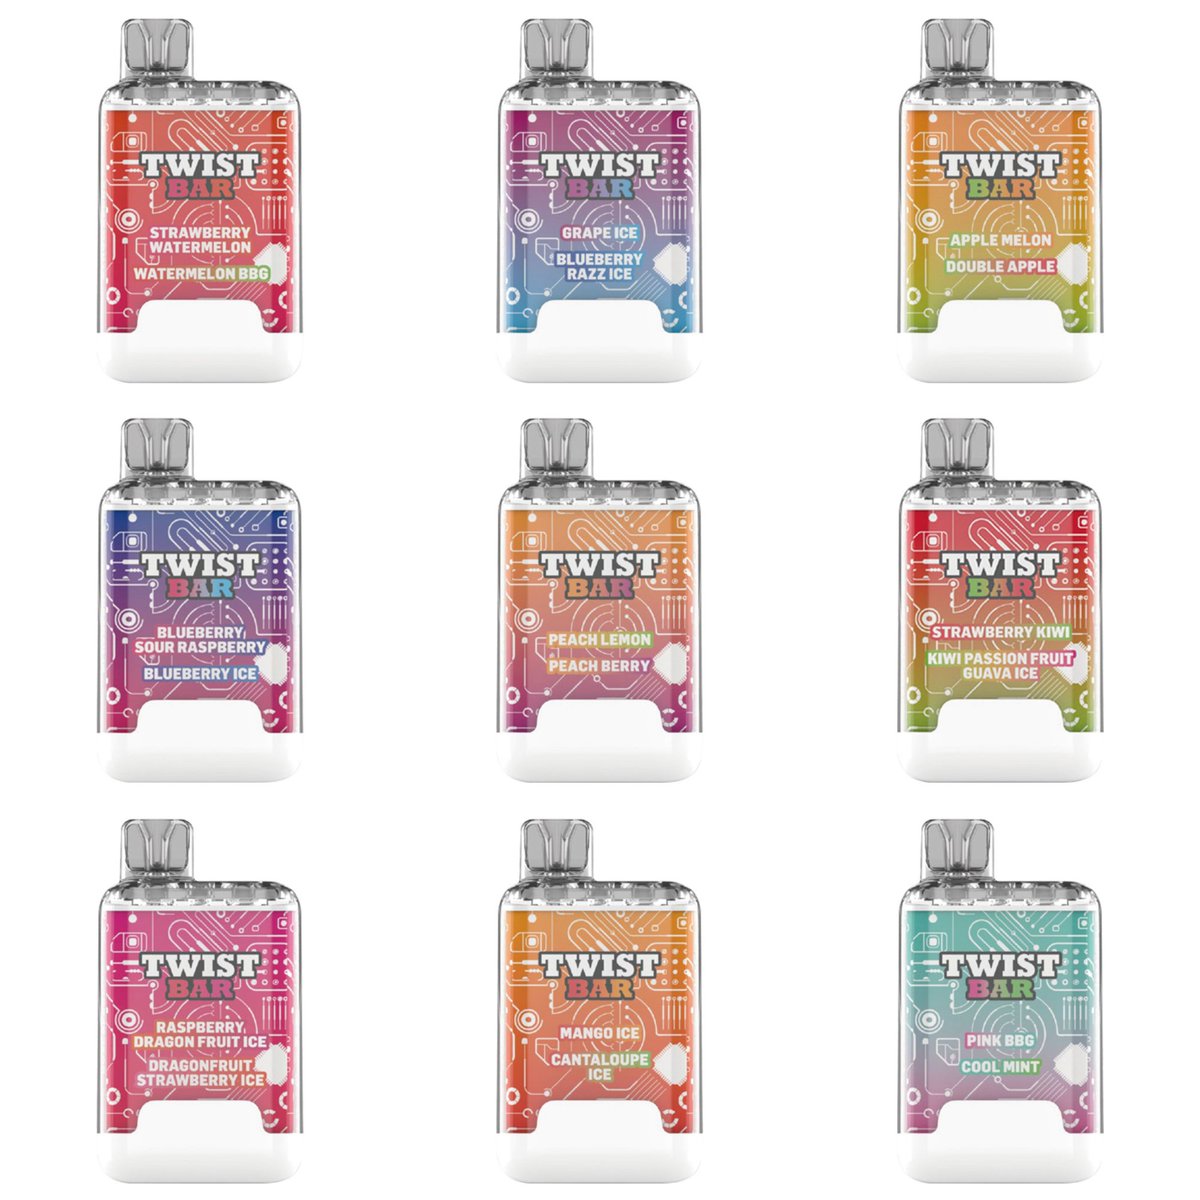 Twist Bar 10000 Puffs Disposable: Get ready for an epic vaping adventure with the Twist Bar – your ultimate companion for flavor-packed fun!

hazesmokeshop.ca/product/twist-…

#hazesmokeshop #canadianvapeshop #vapeshopVancouver #TwistBar10000canada #TwistBar10000 #10kpuffs #vape #TwistBar